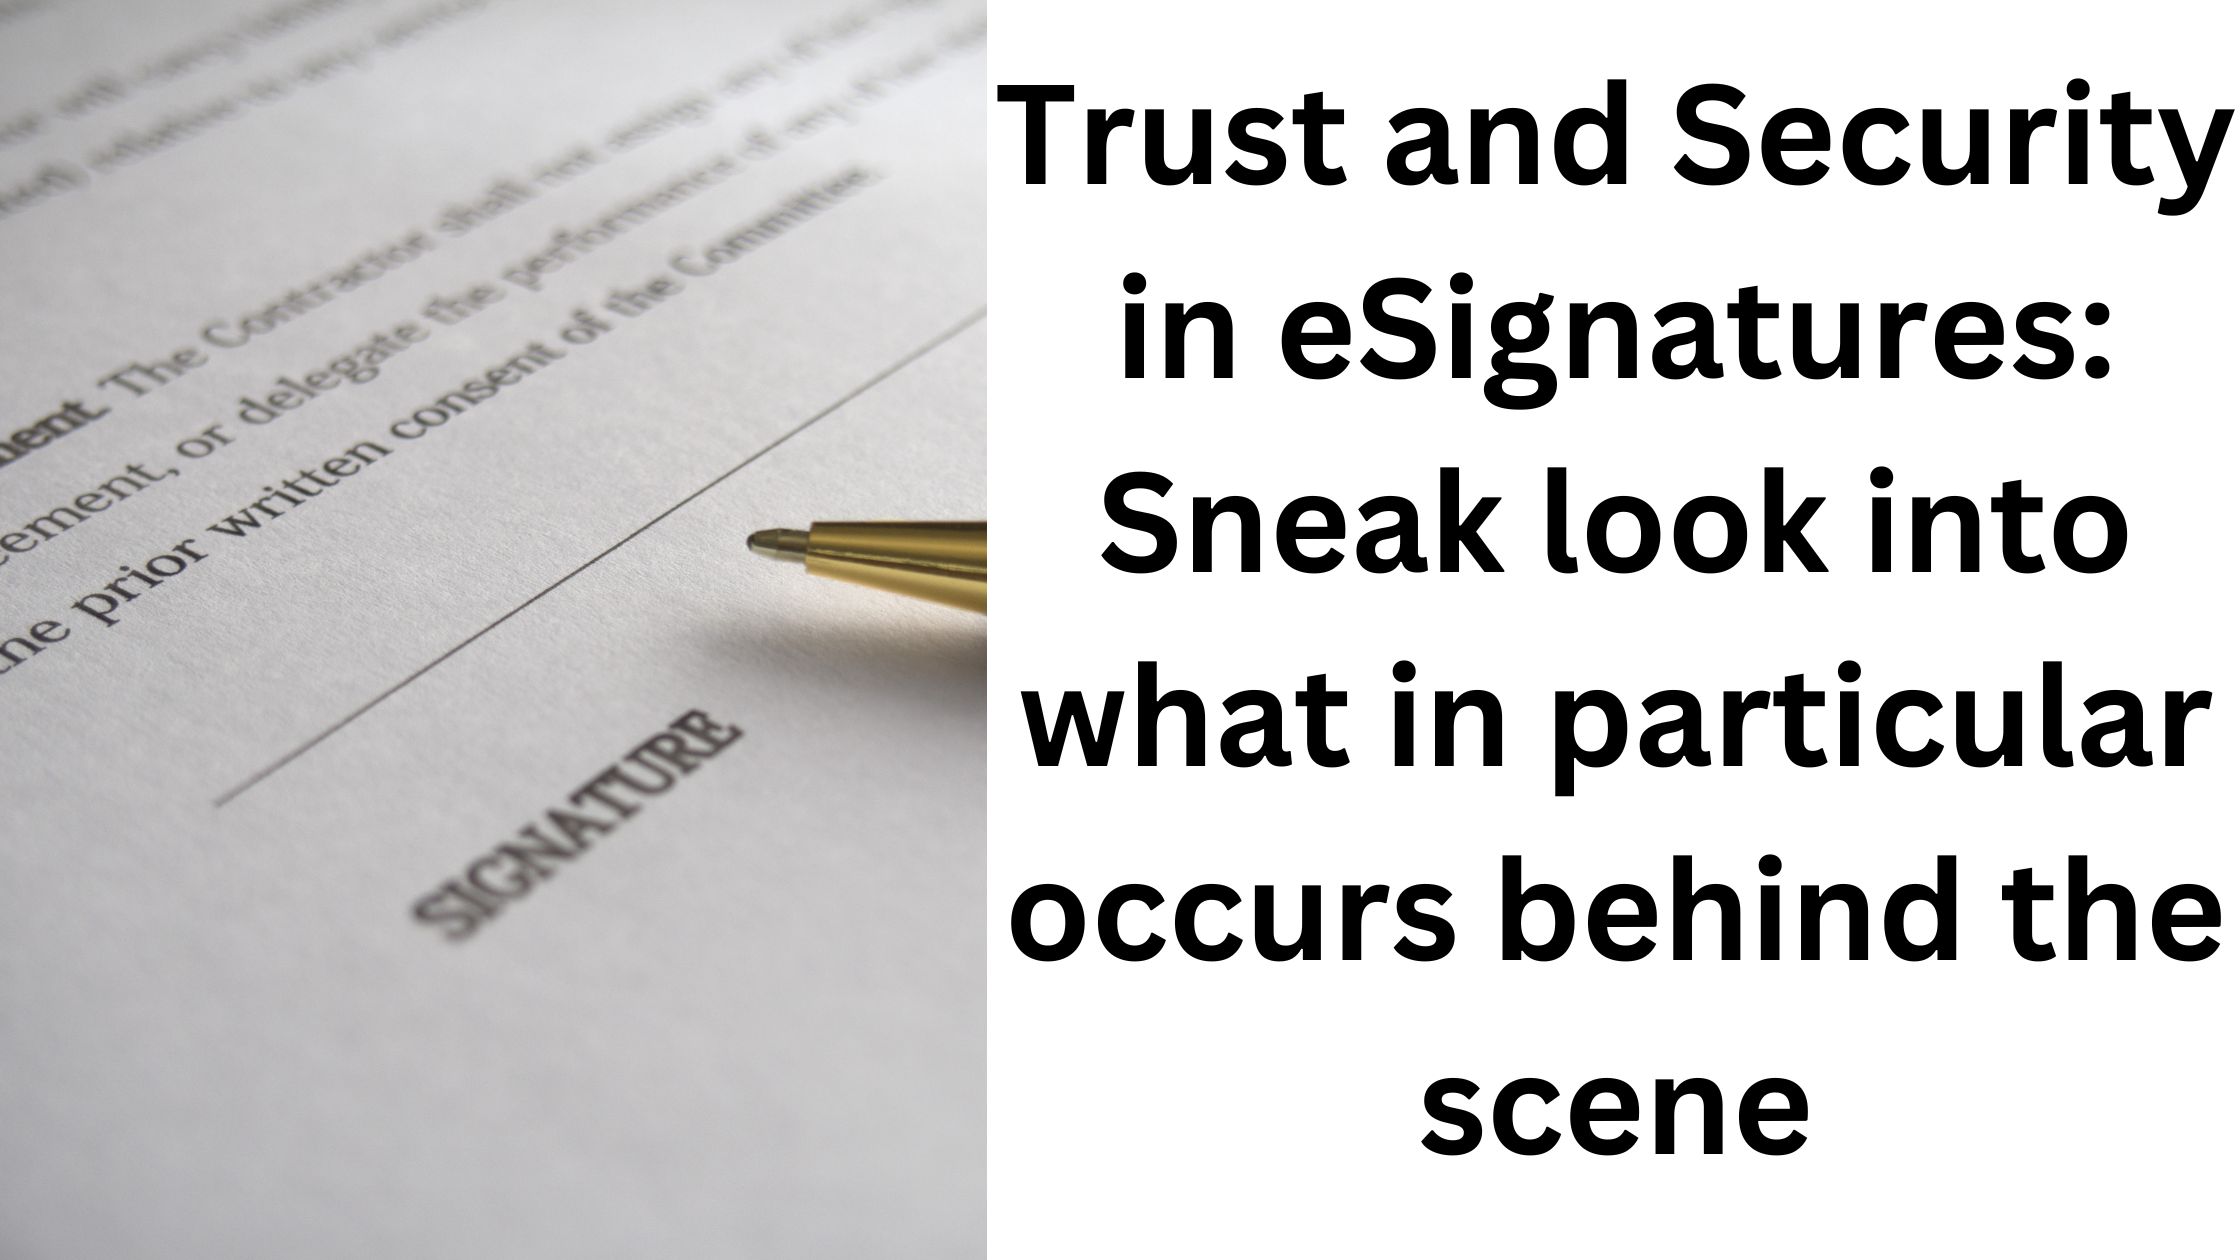 Trust and Security in eSignatures: Sneak look into what in particular occurs behind the scene￼